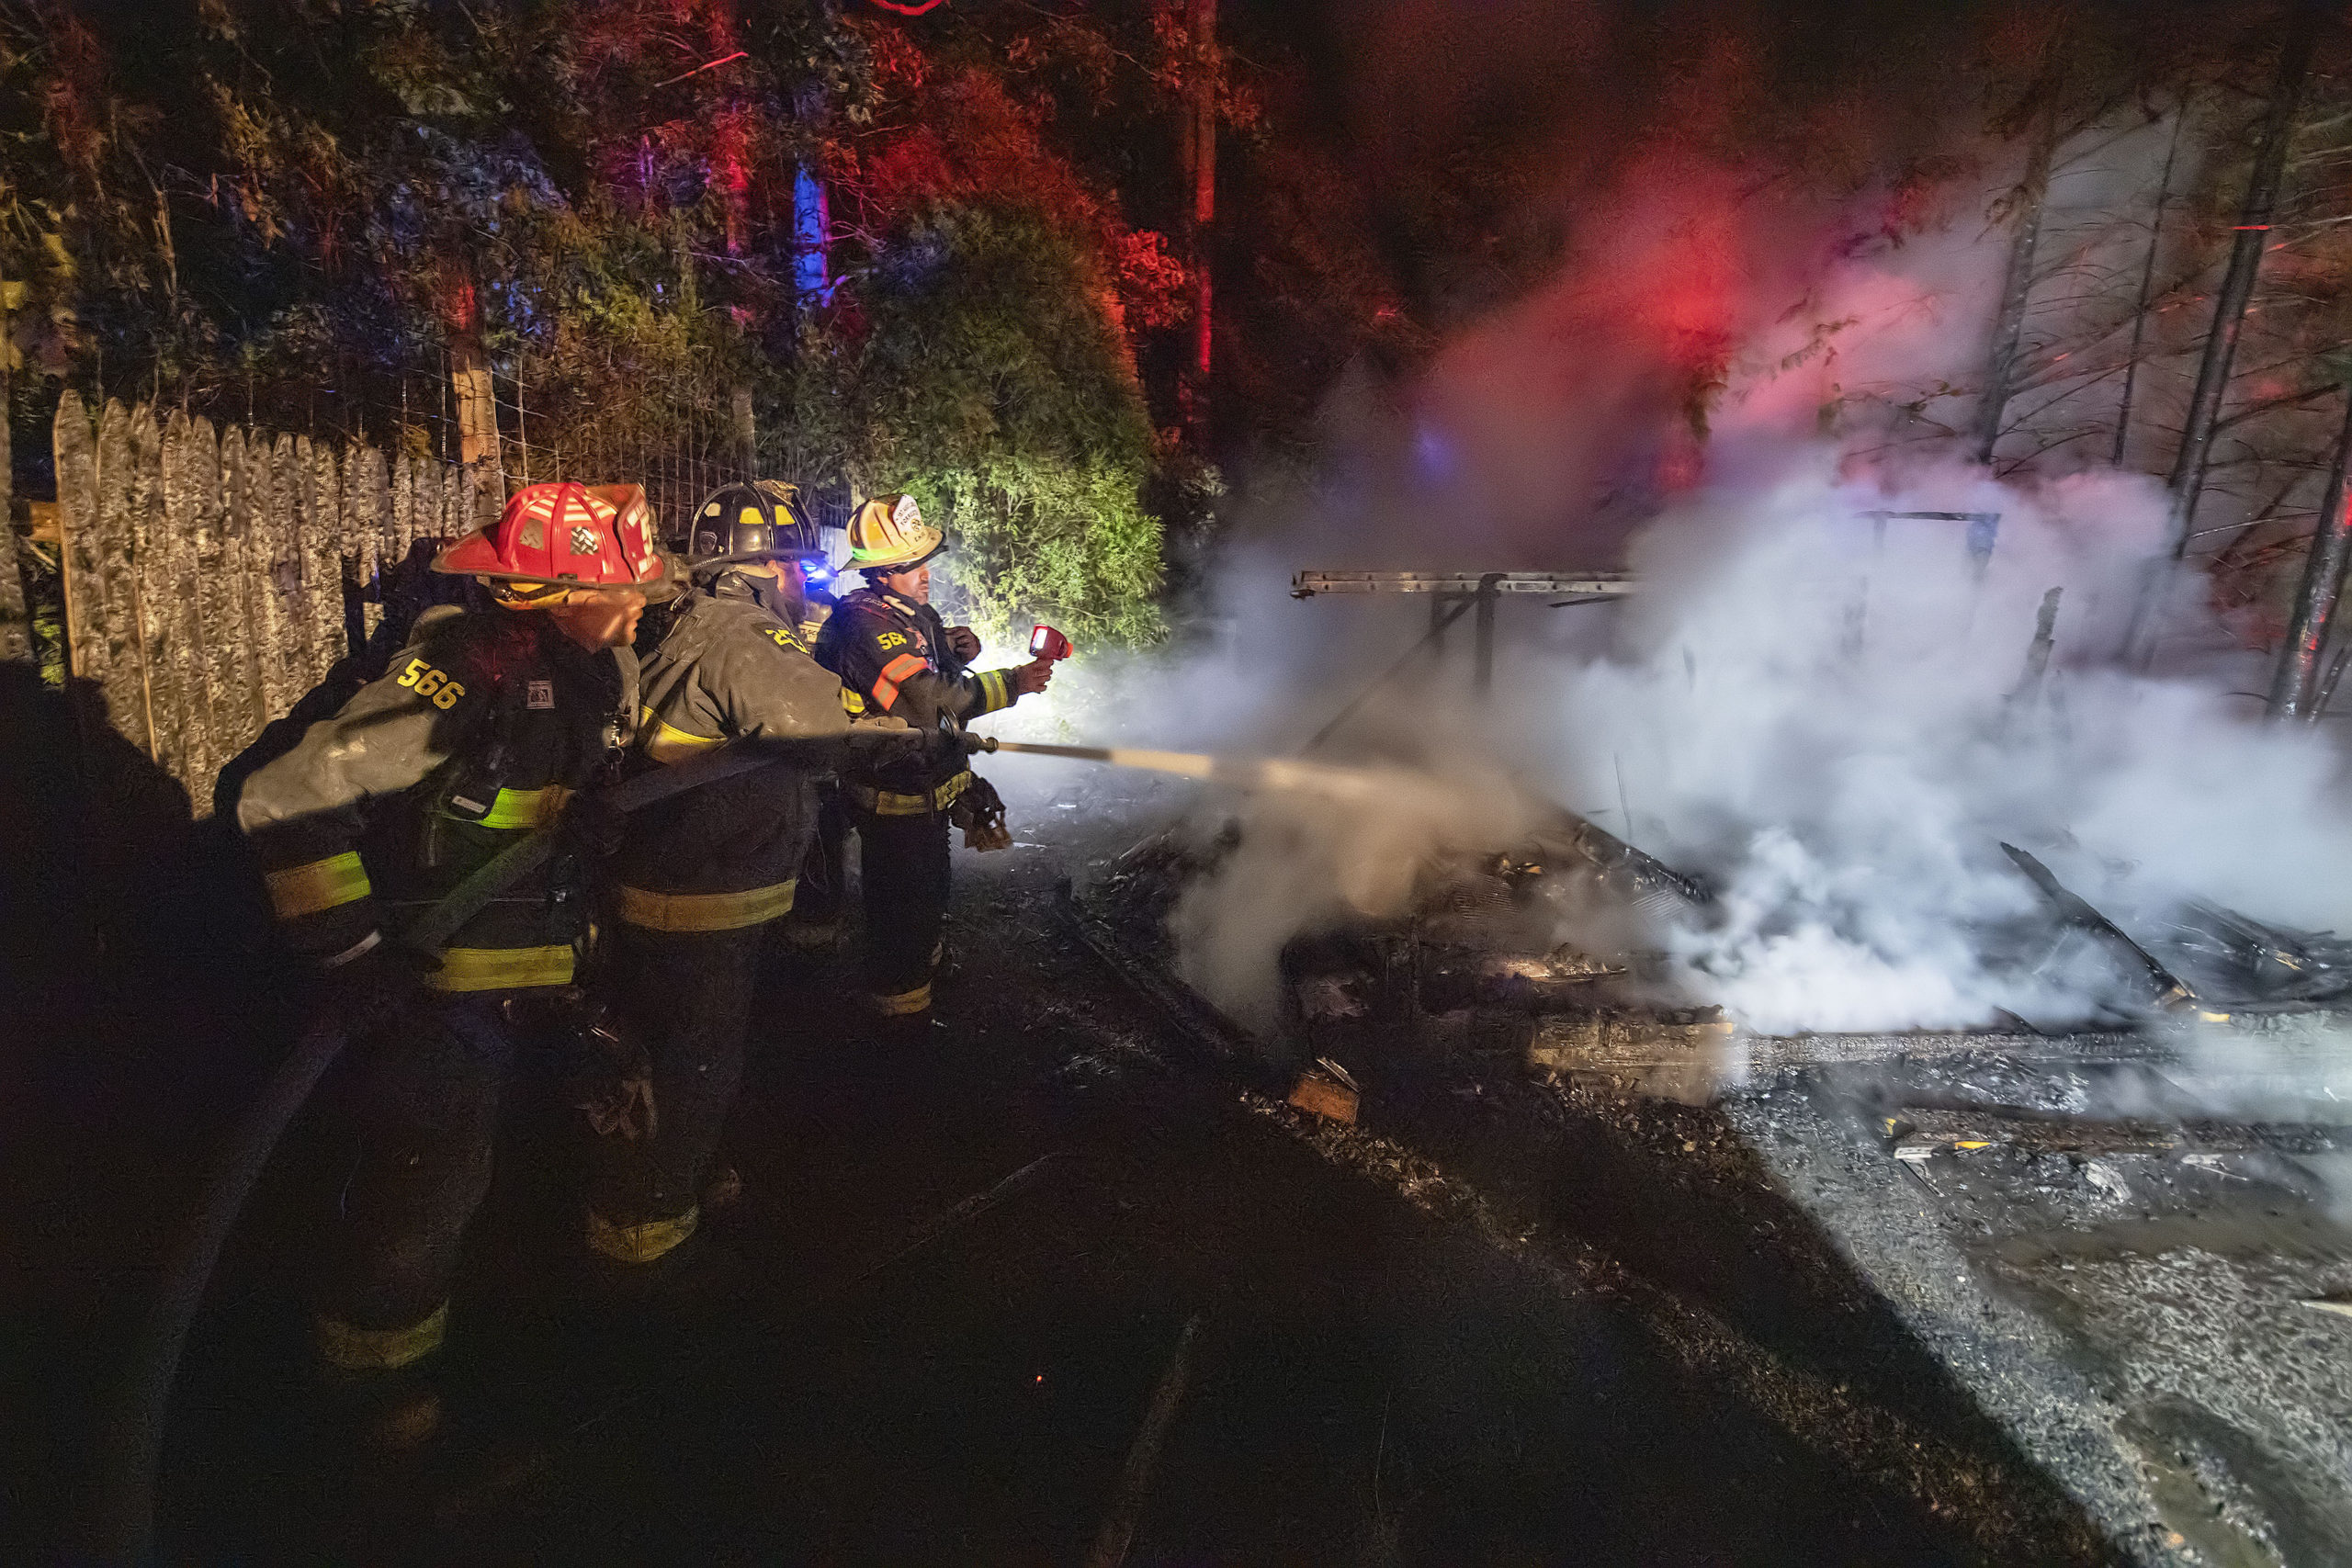 East Hampton firefighters were called out to extinguish a fire that destroyd a shed on Cove Hollow Road in East Hampton late June 17. MICHAEL HELLER PHOTOS